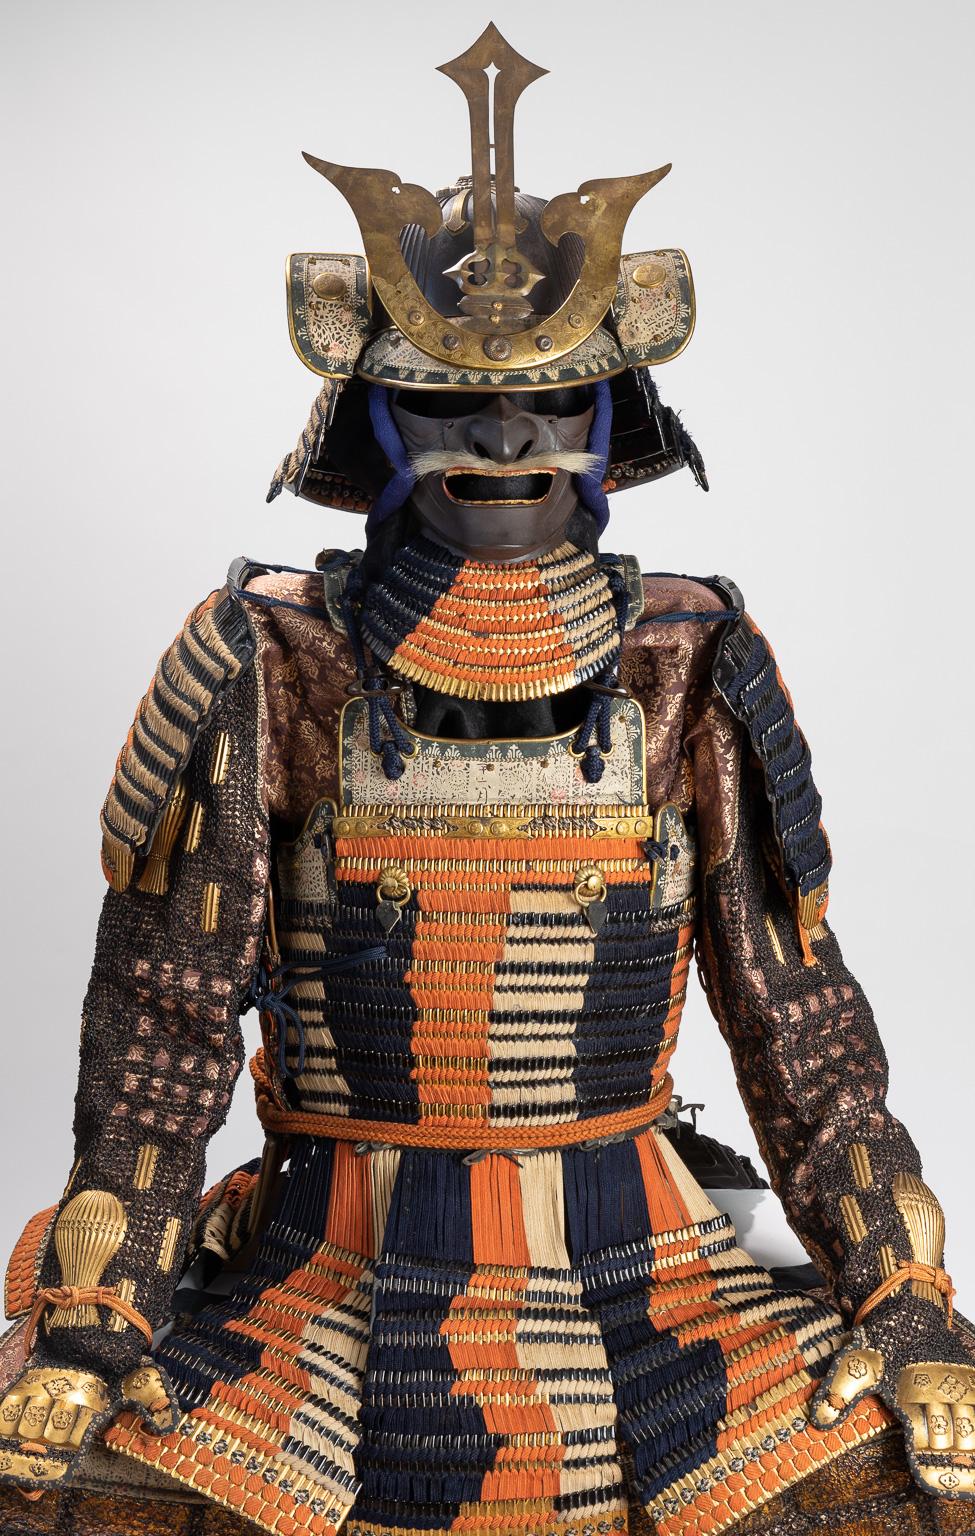 Japanese armor of Do-maru type
Early Edo period, 17th-18th century

Certificate

The armor accompanied by a certificate of registration as Koshu Tokubetsu Kicho Shiryo (Especially Important Armor Object) no. 1277 issued by the Nihon Katchu Bugu